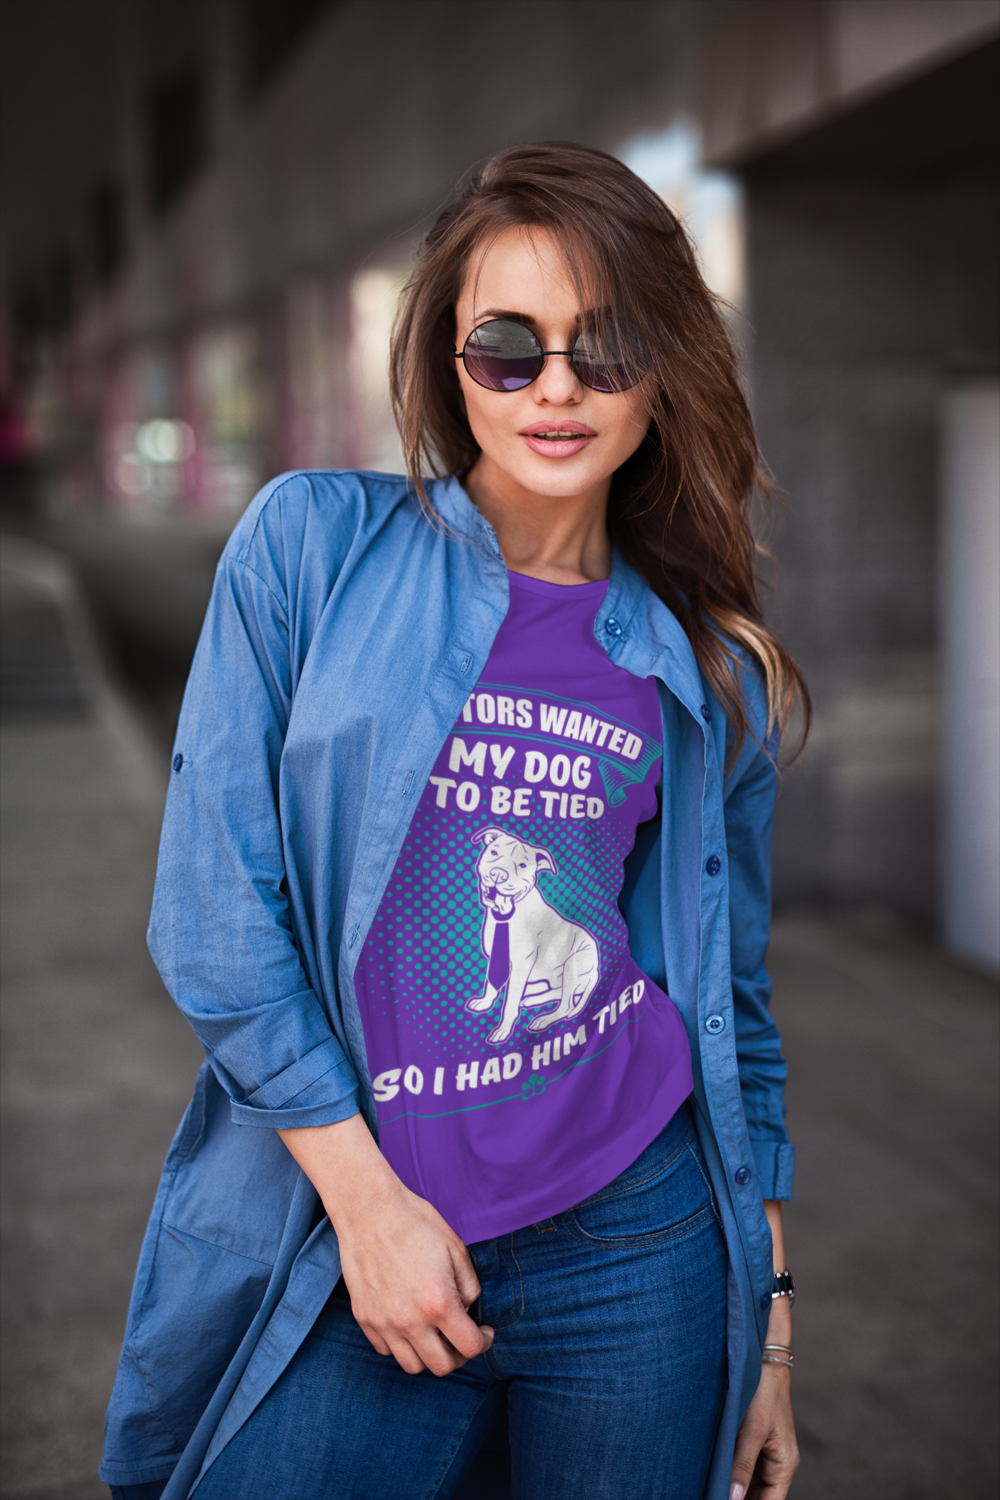 mockup of a woman with a crewneck t shirt and sunglasses posing on the street 1196 el1